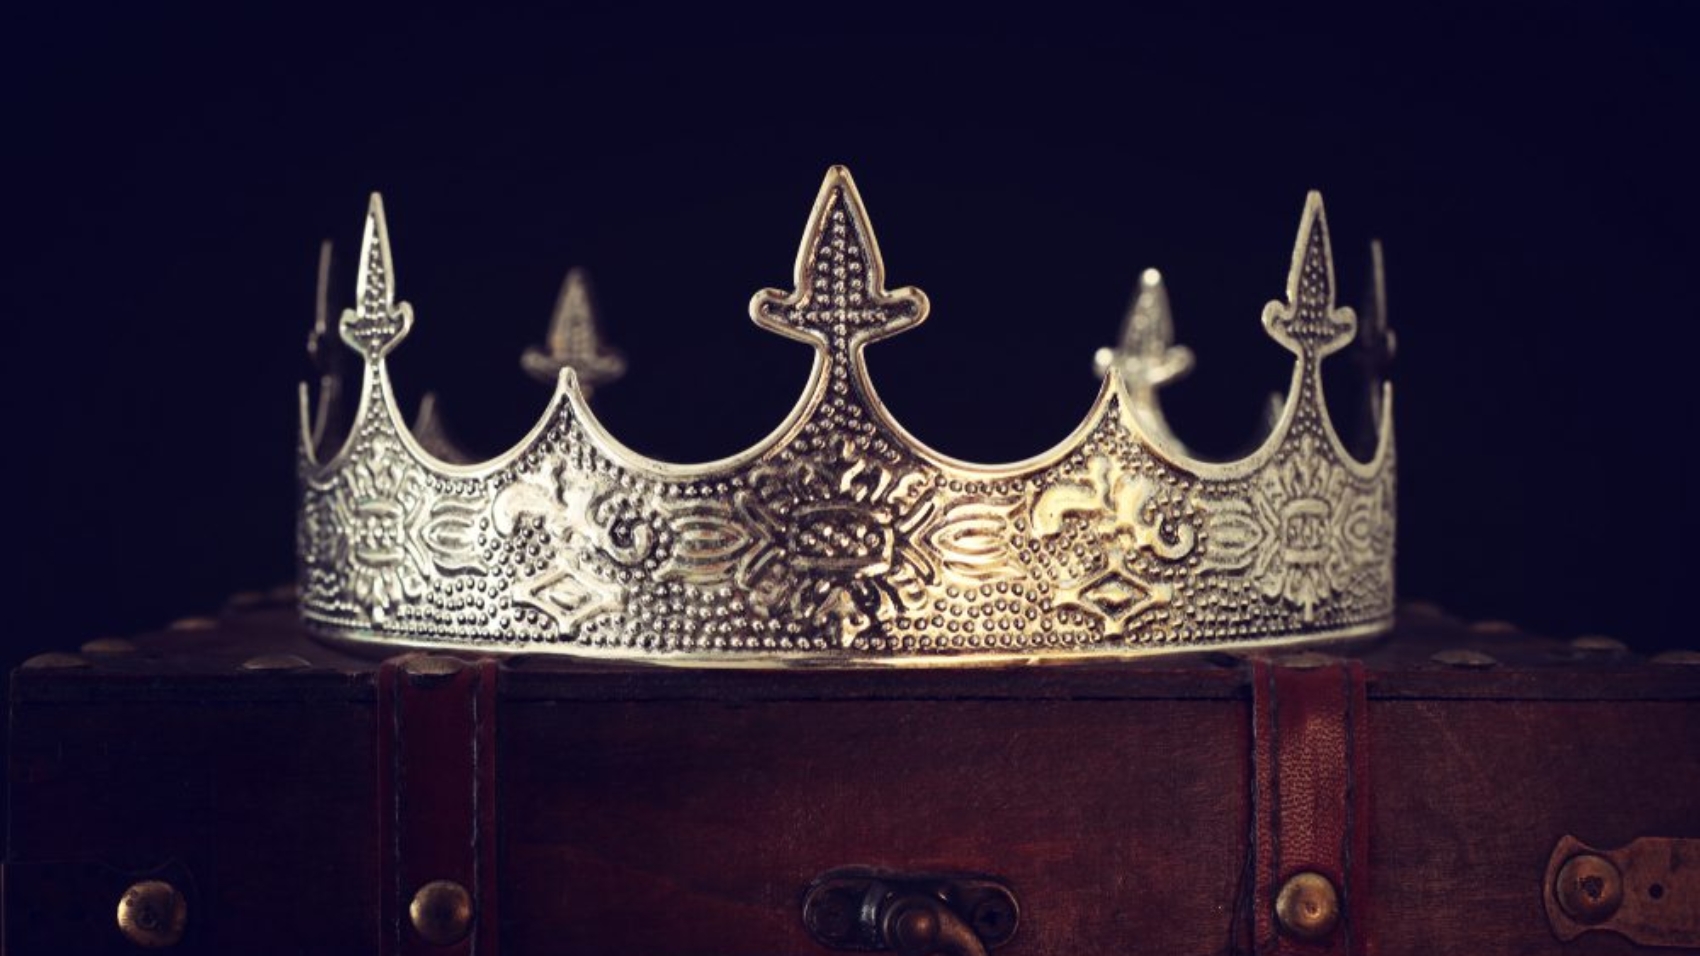 Low,Key,Image,Of,Beautiful,Queen/king,Crown,Over,Wooden,Table.